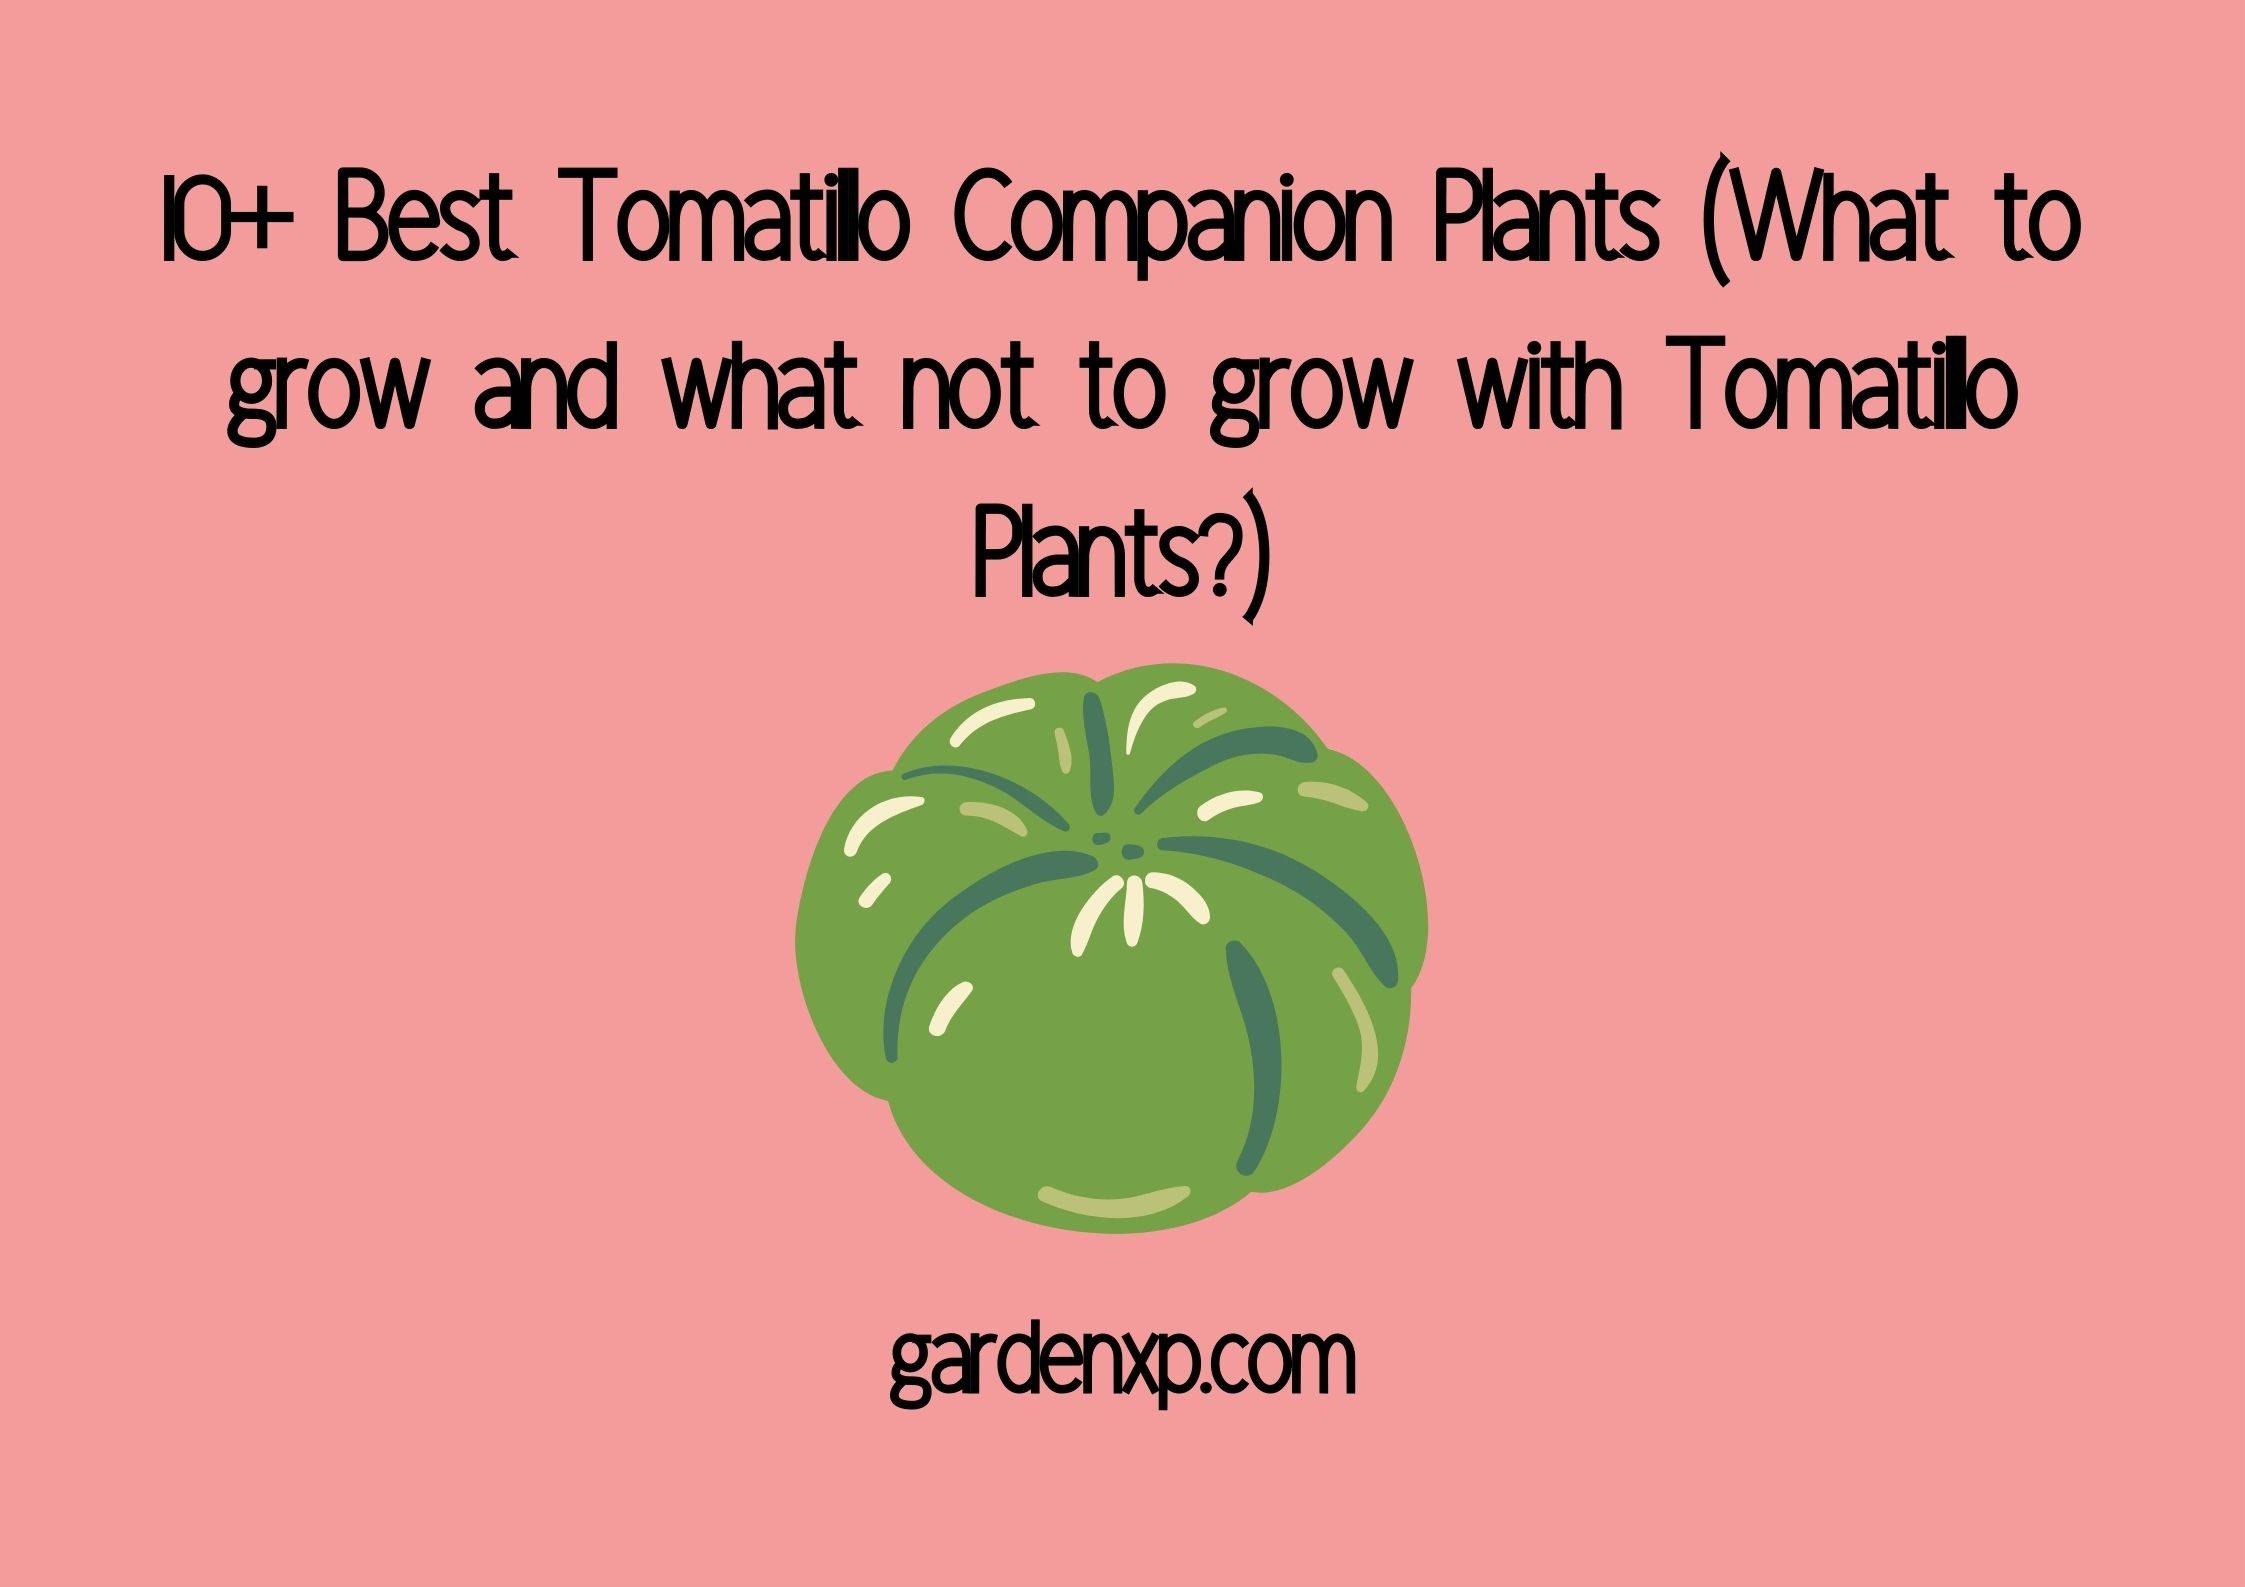 10+ Best Tomatillo Companion Plants (What to grow and what not to grow with Tomatillo Plants?)